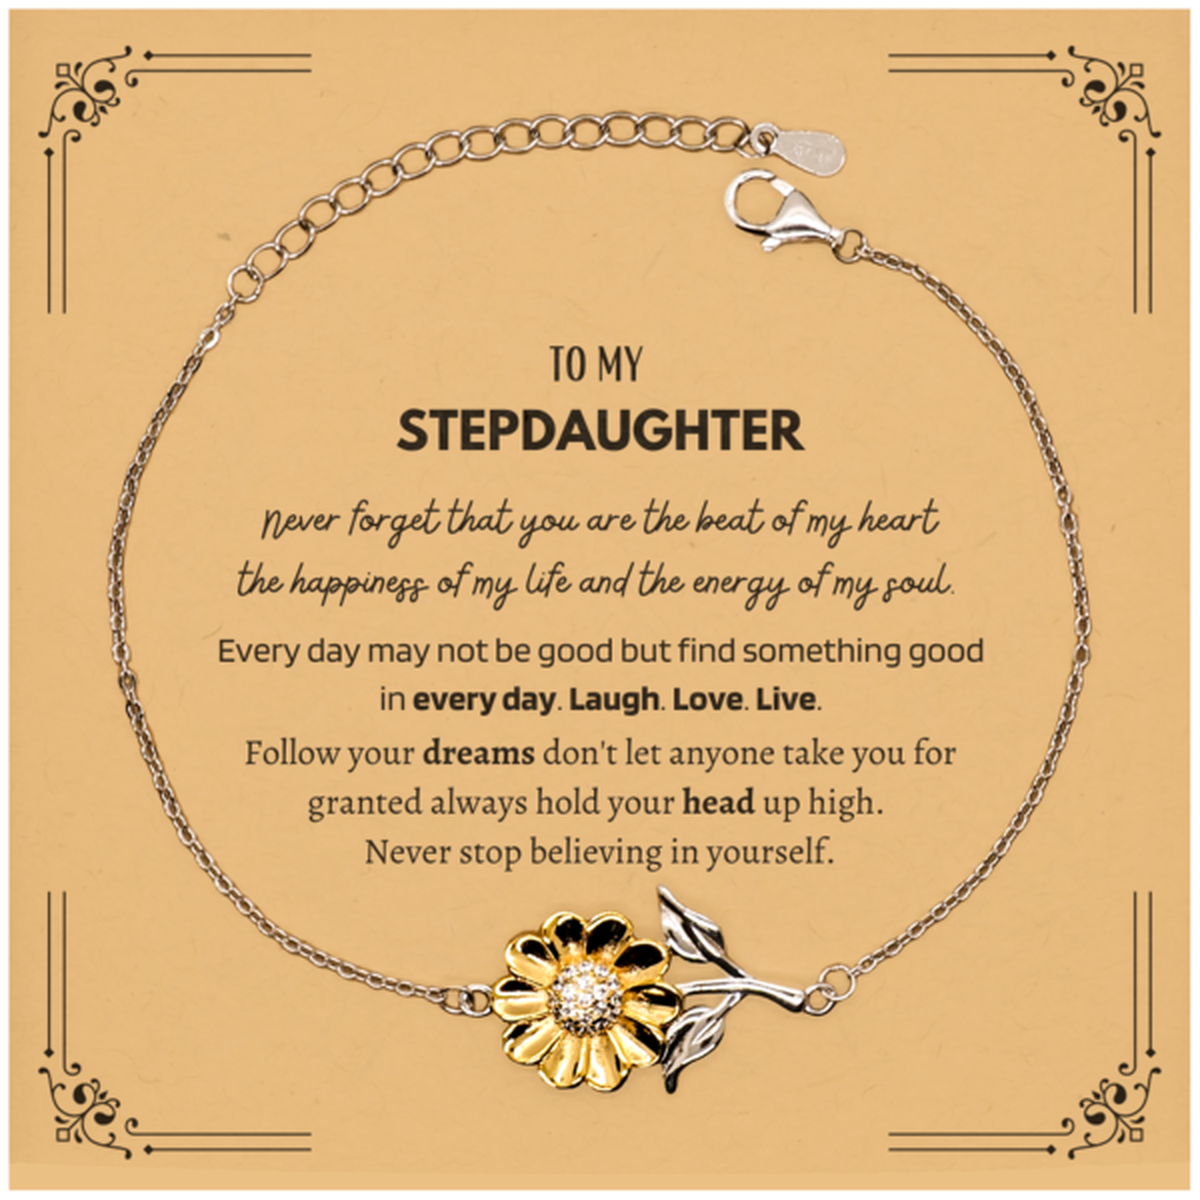 To My Stepdaughter Message Card Gifts, Christmas Stepdaughter Sunflower Bracelet Present, Birthday Unique Motivational For Stepdaughter, To My Stepdaughter Never forget that you are the beat of my heart the happiness of my life and the energy of my soul